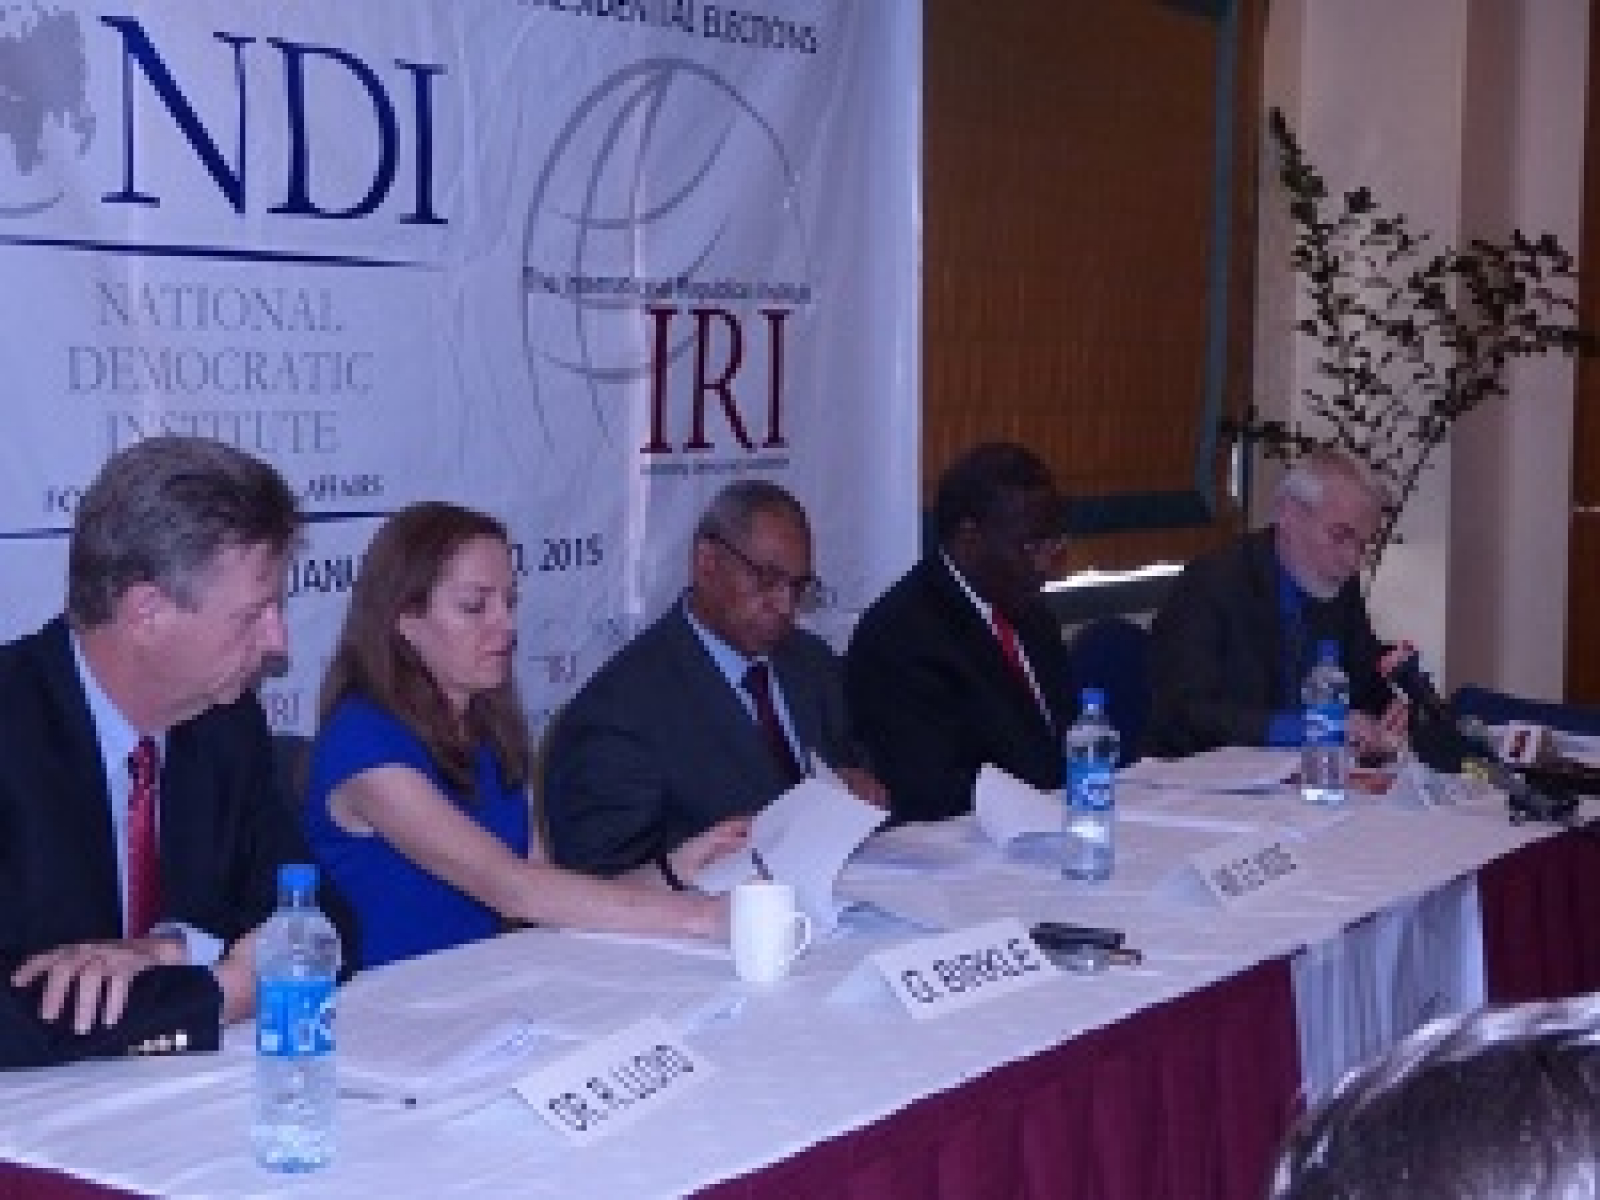 Statement of the Joint NDI/IRI Pre-Election Assessment Mission to Nigeria